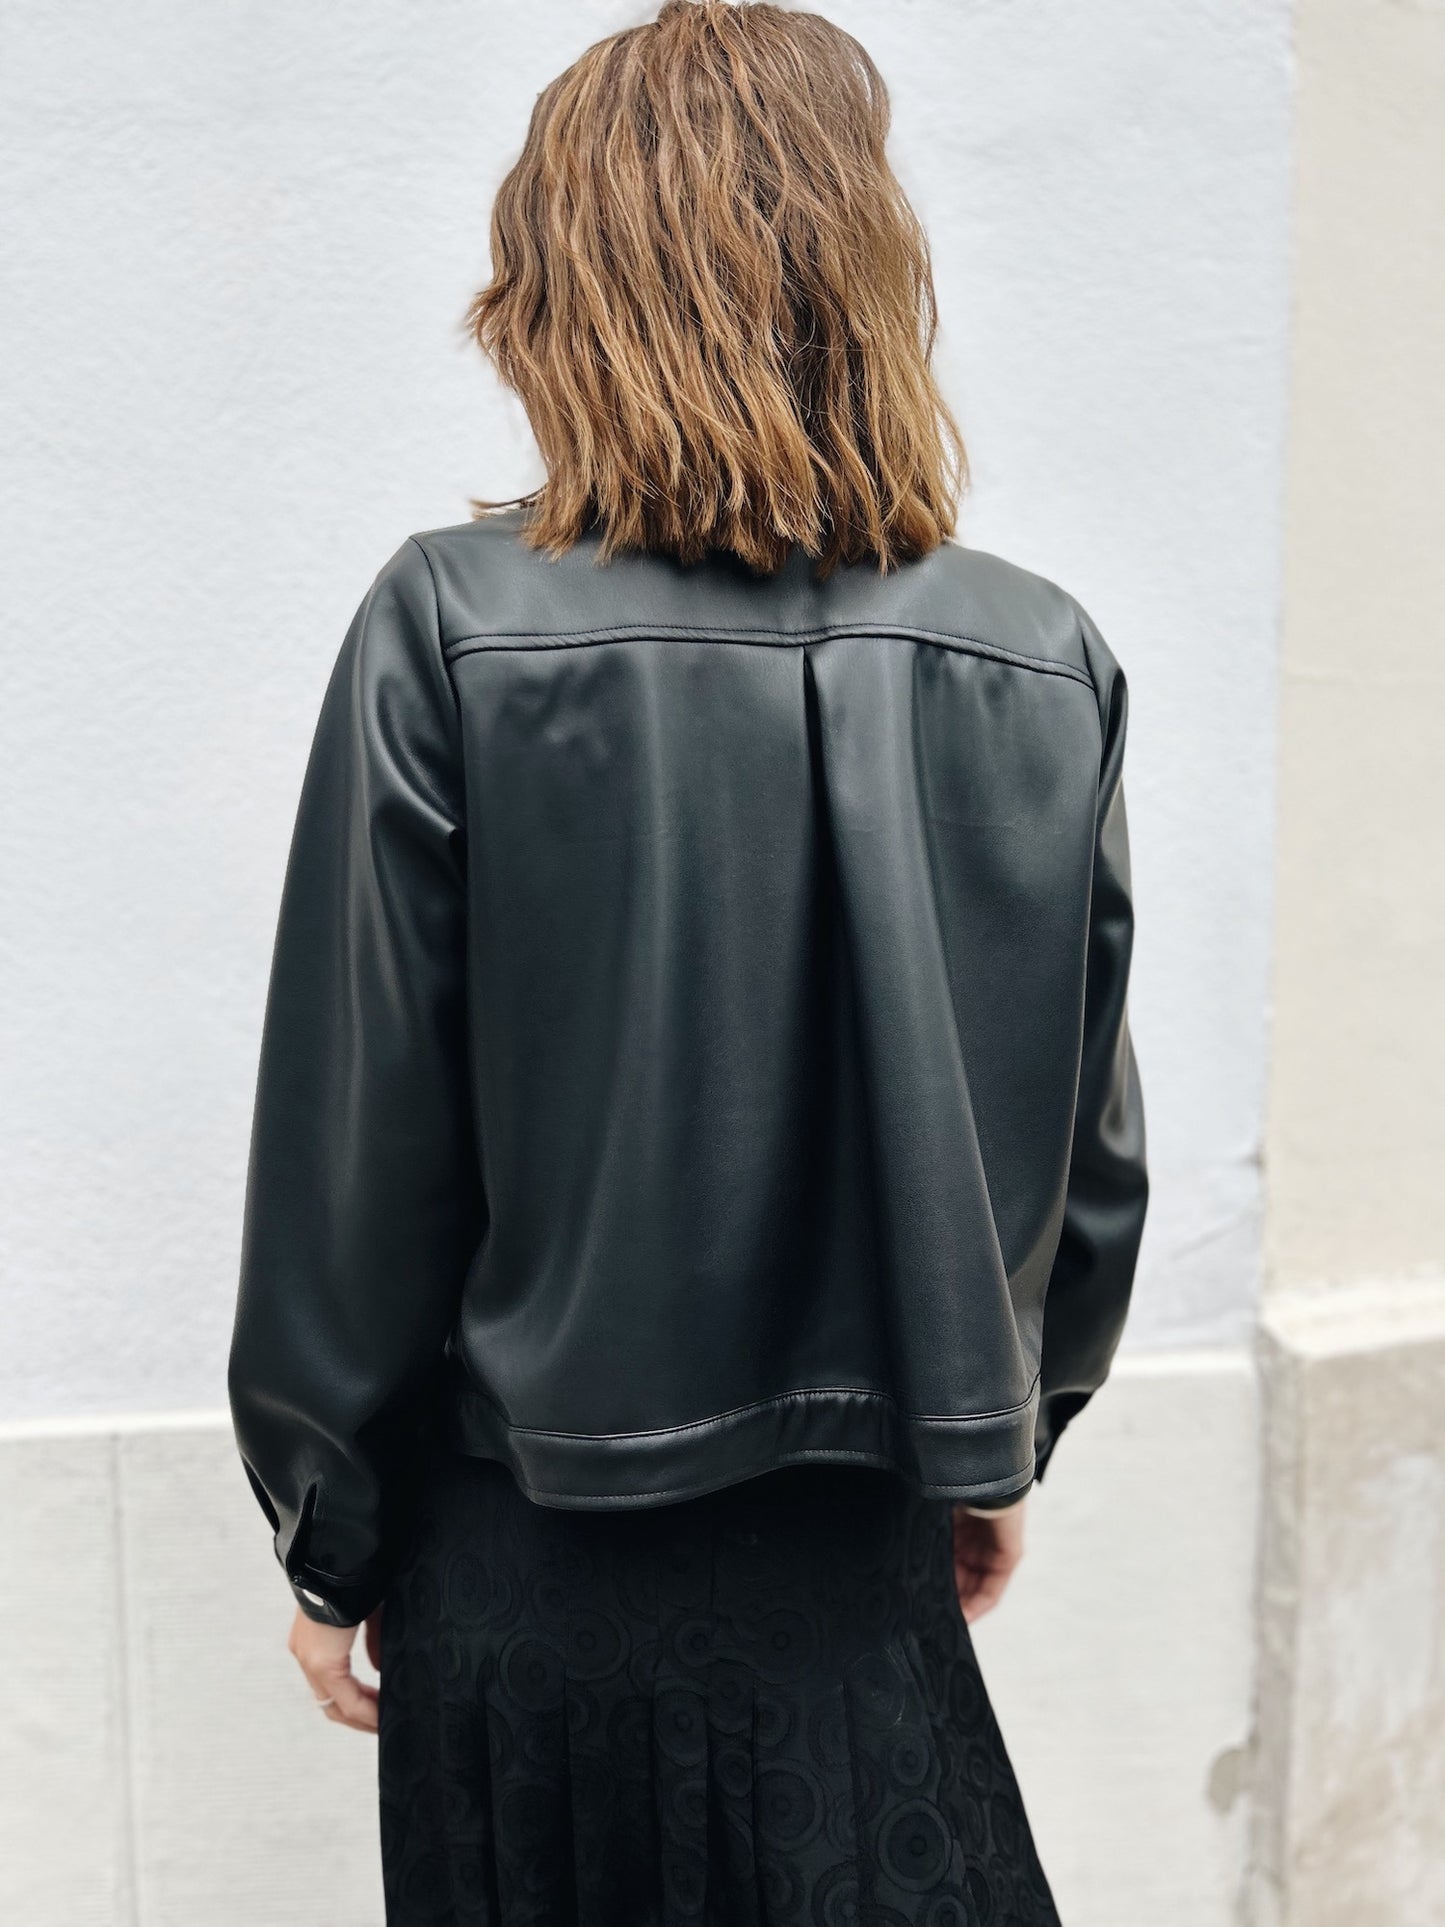 The Suzanne jacket - black